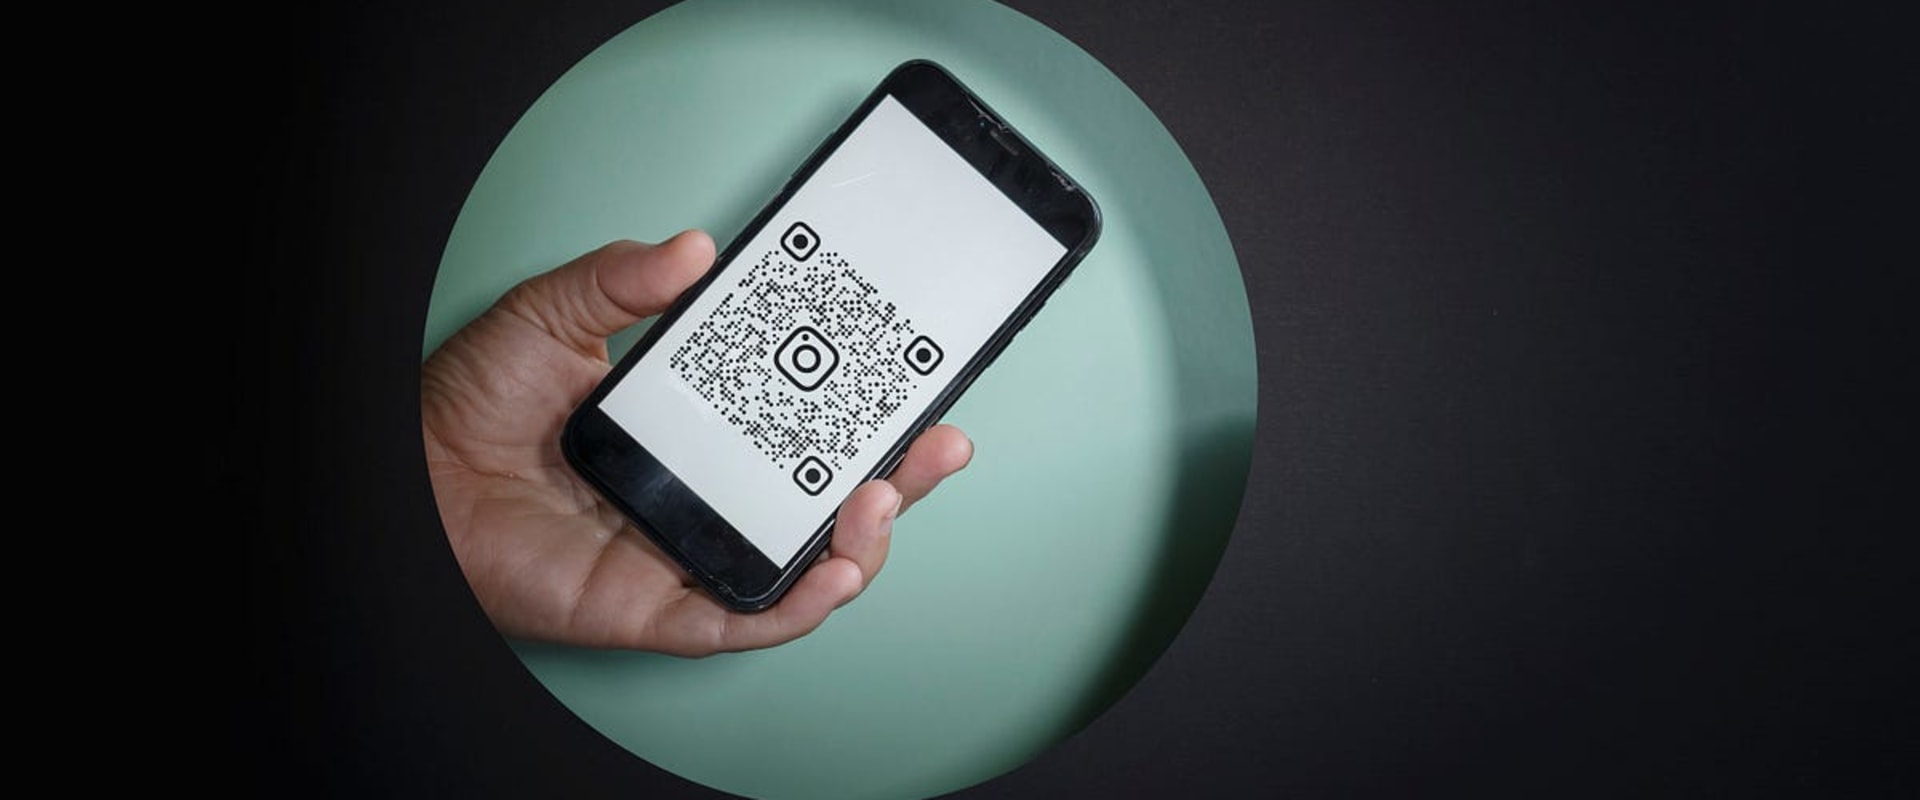 Comparing QR Code Scanning Accuracy